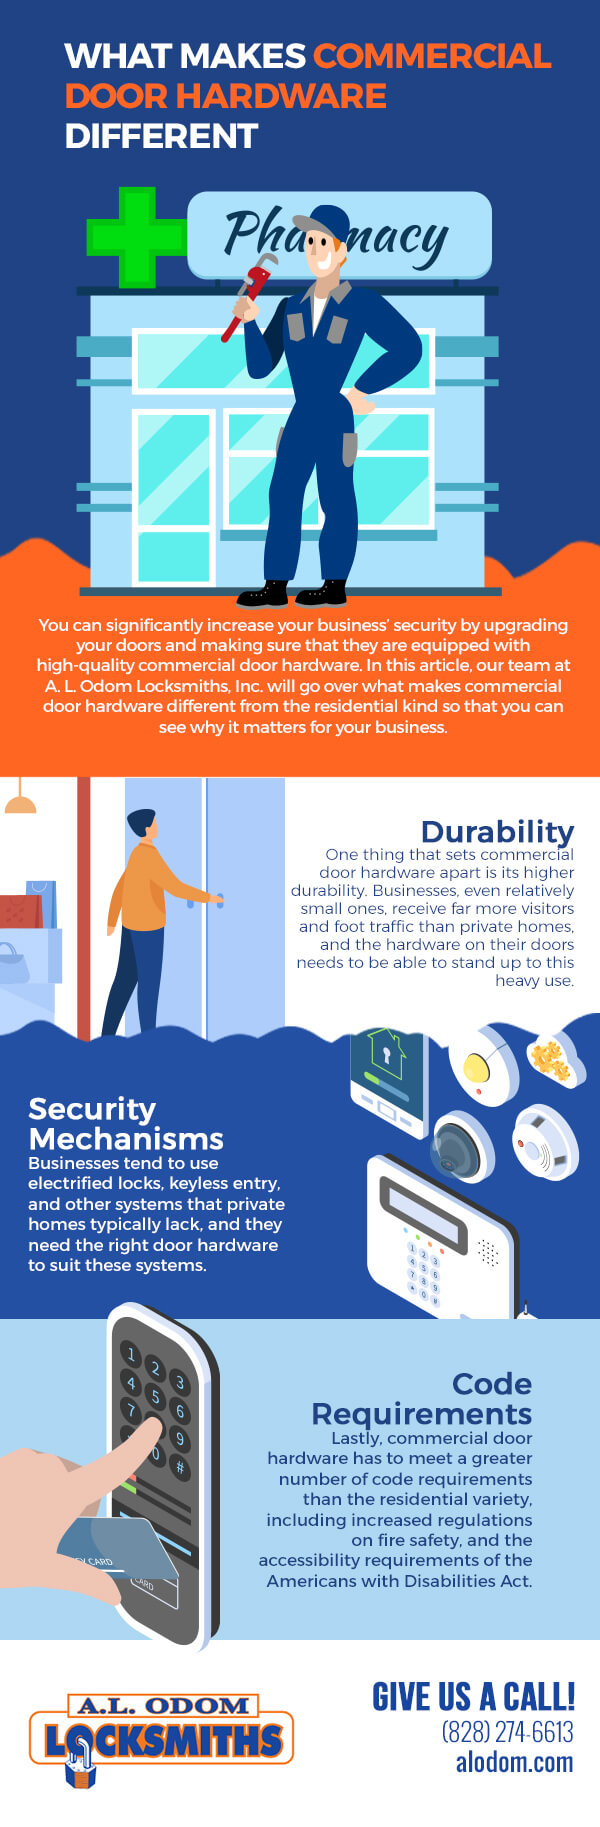 What Makes Commercial Door Hardware Different